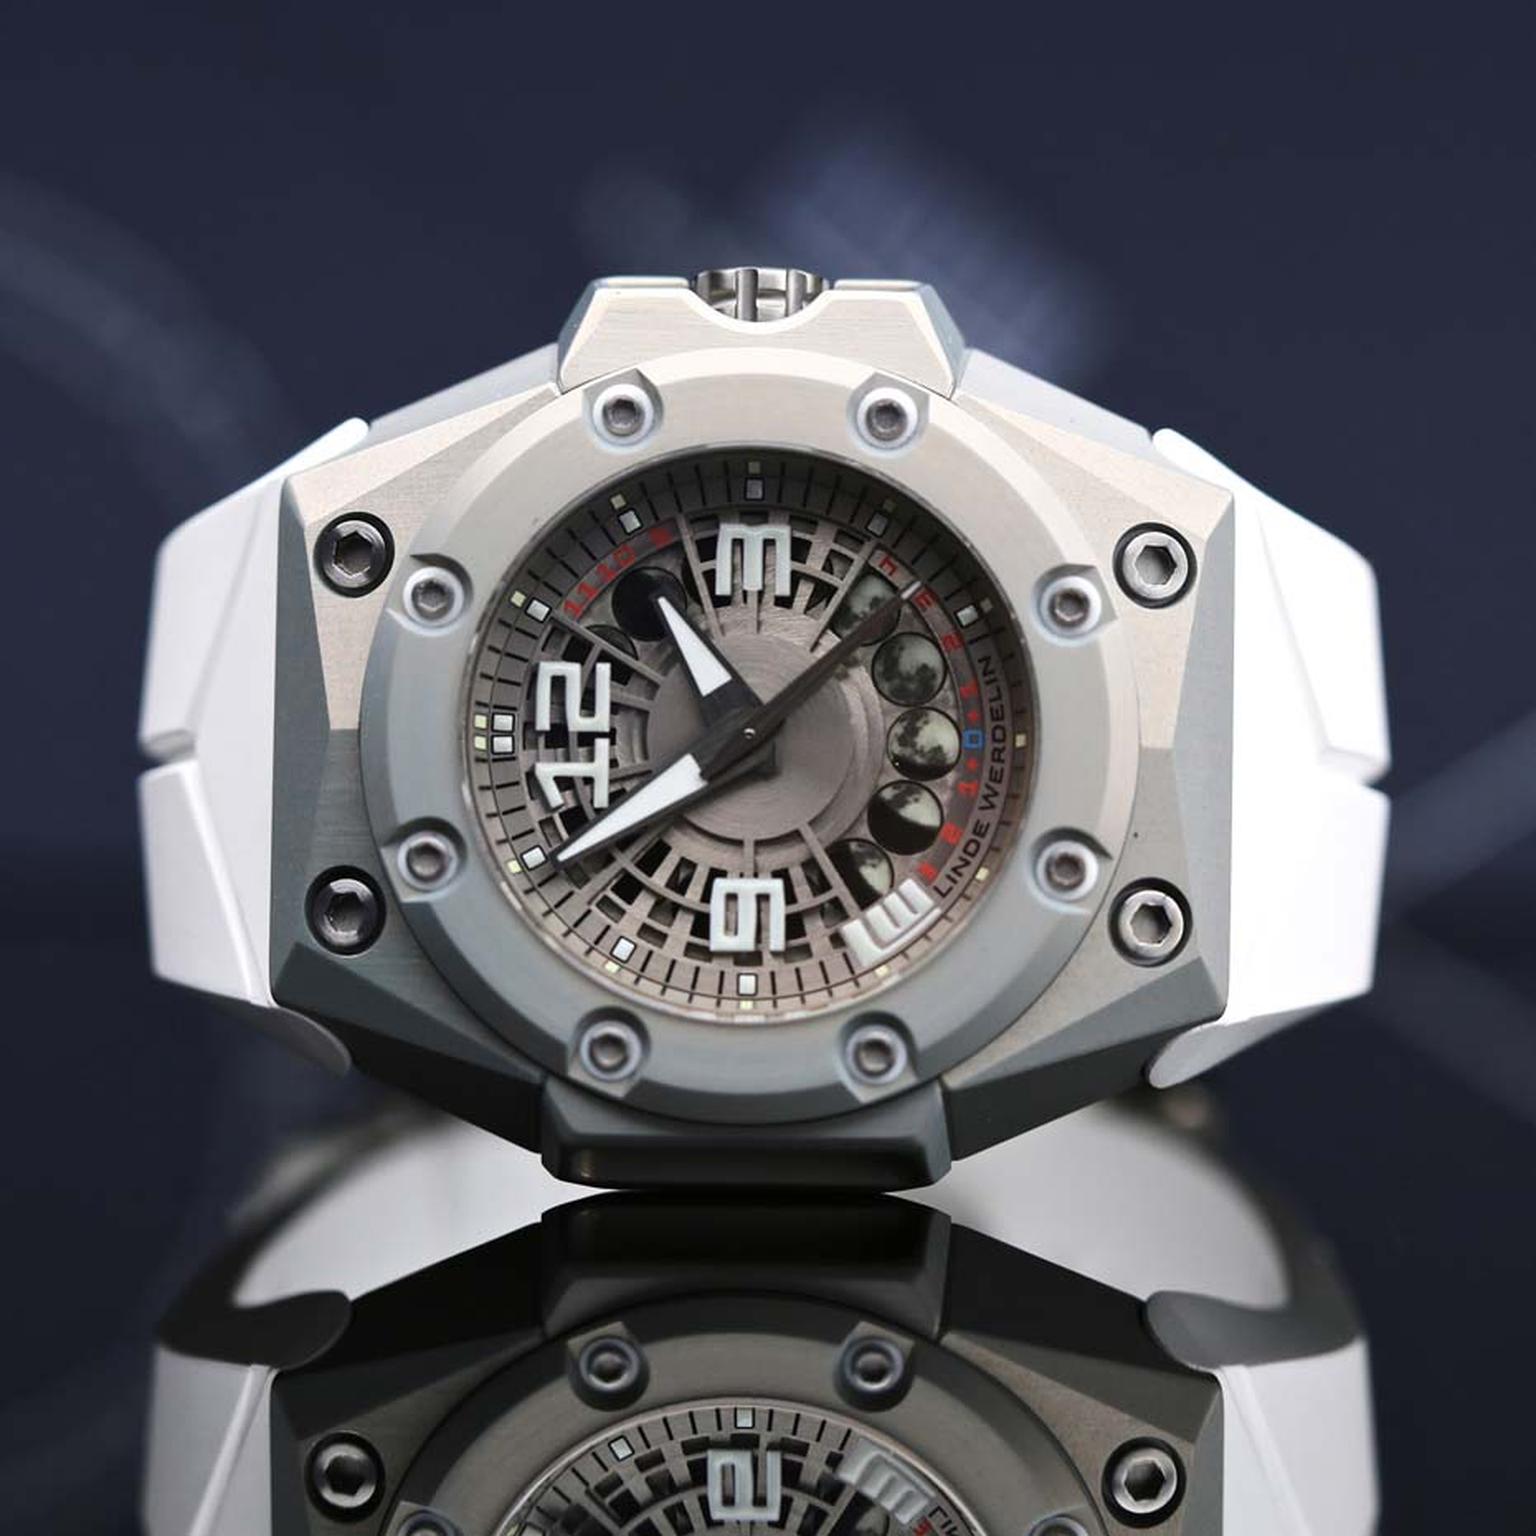 The lightest Linde Werdelin timepiece ever made, the Oktopus MoonLite watch features colourless ALW, an alloy developed by Linde Werdelin that is twice as hard as steel and half the weight of titanium